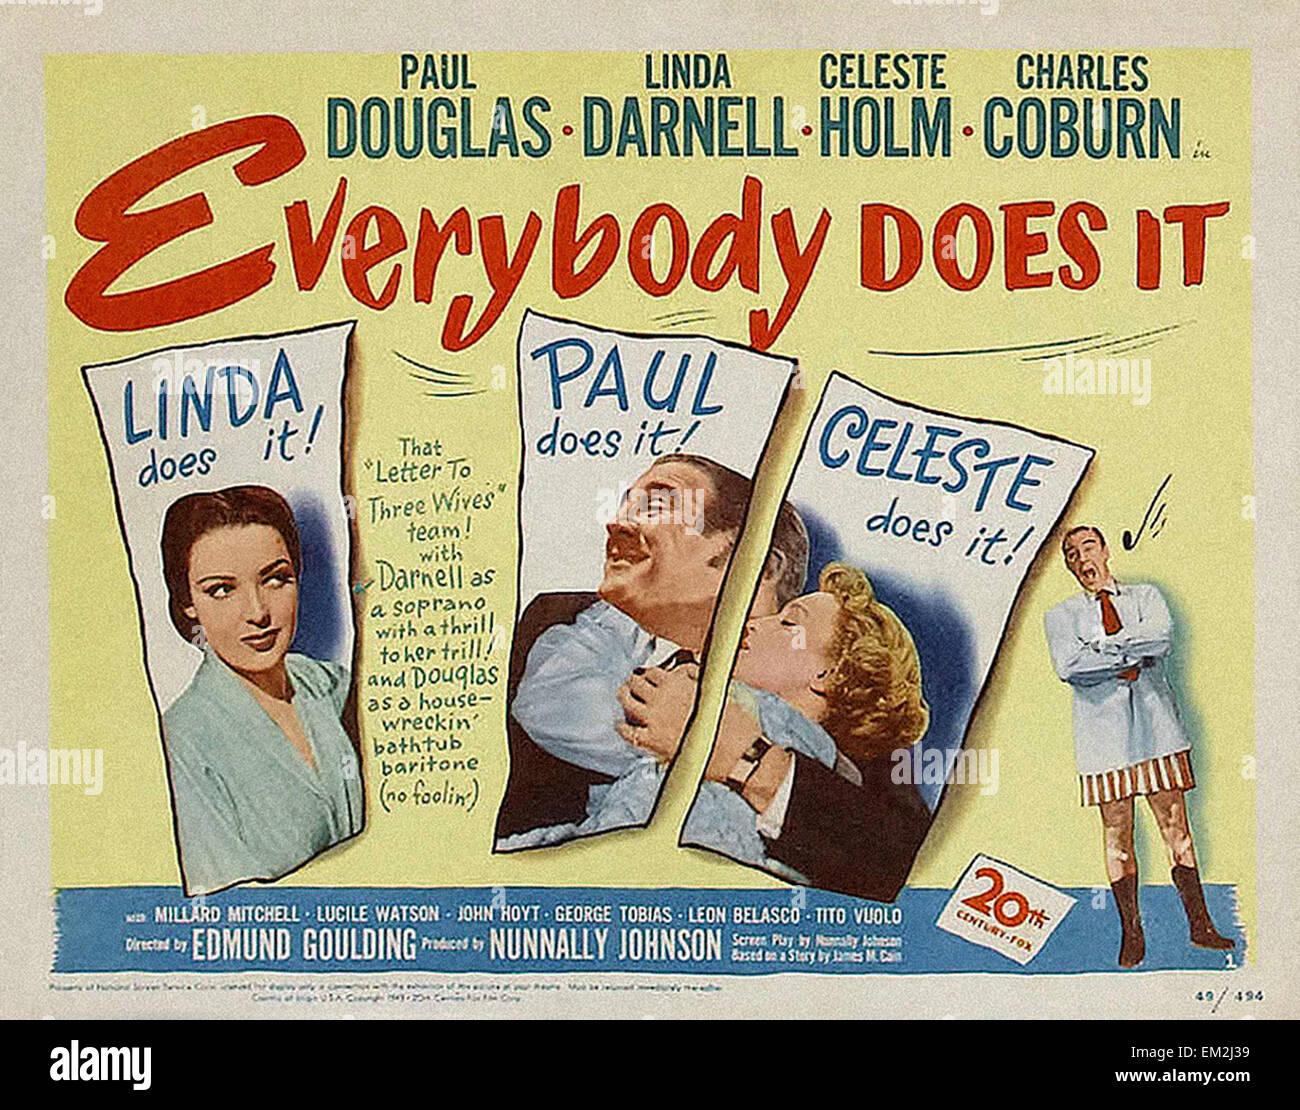 Everybody Does It  - Movie Poster Stock Photo